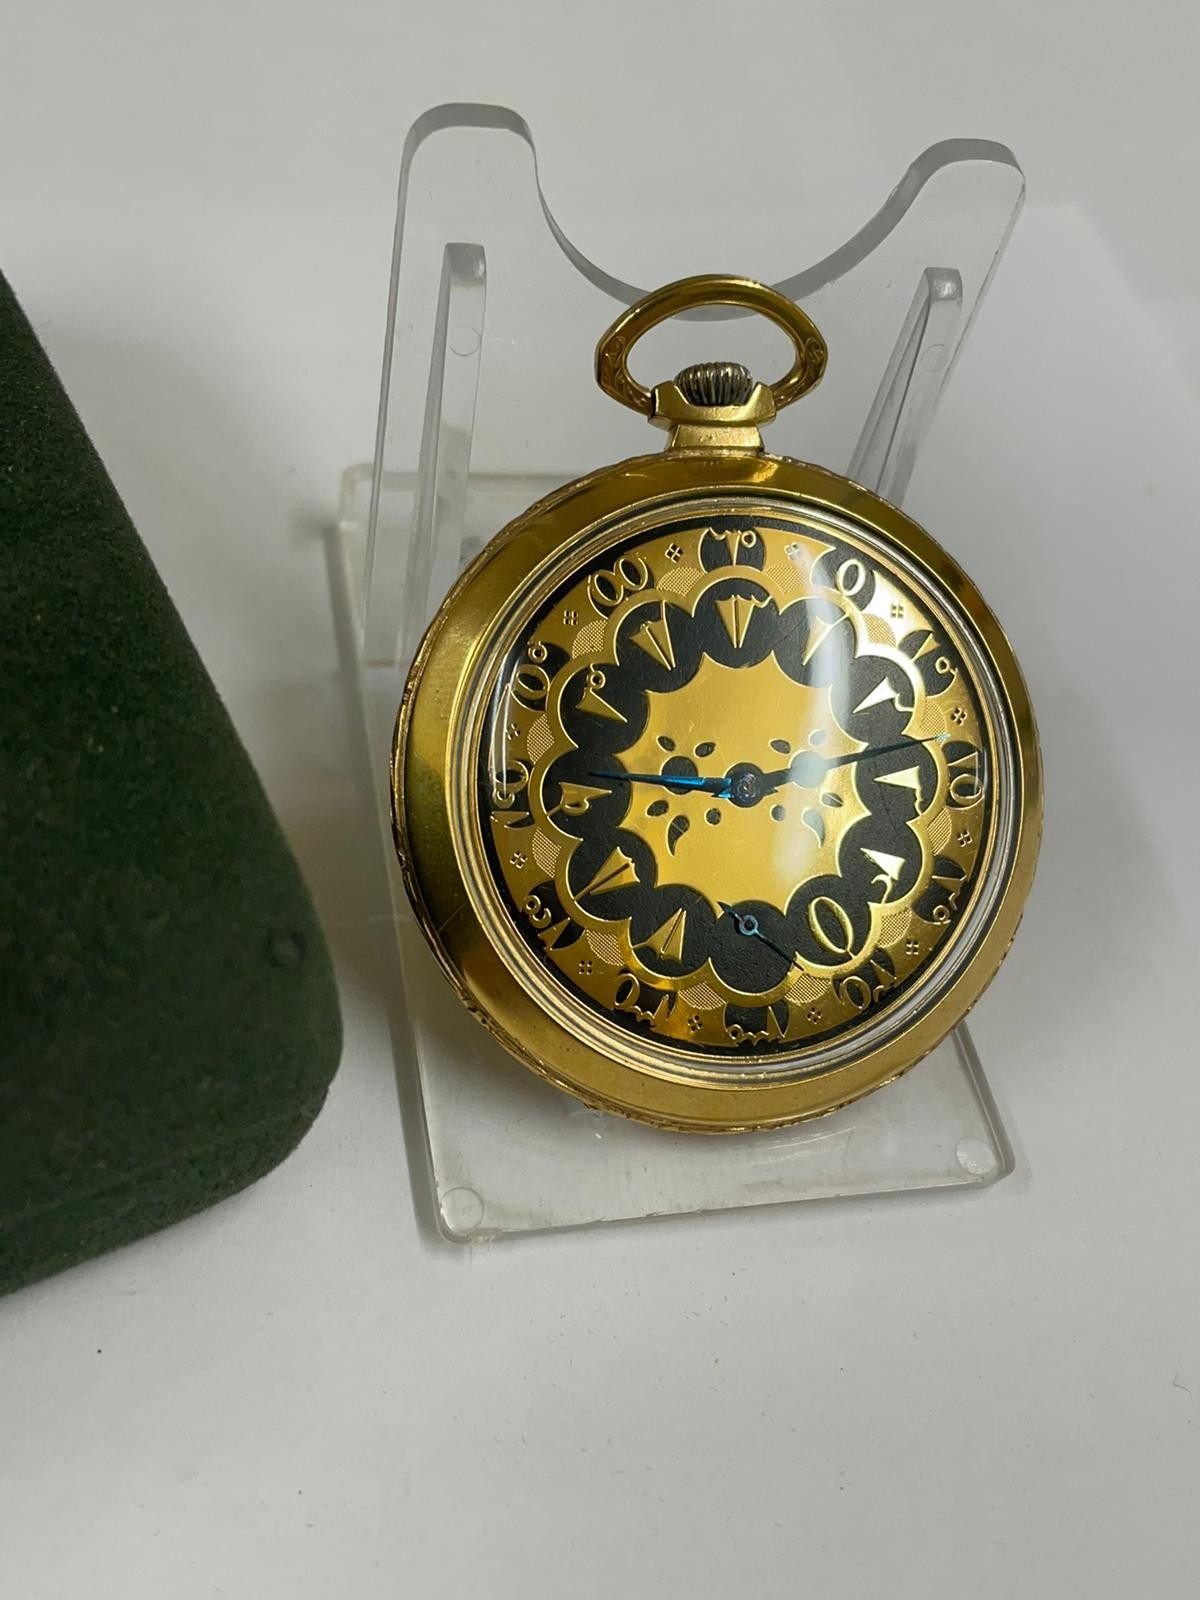 Vintage yellow metal Turkish ottoman omega pocket watch, working but sold with no guarantees - Image 8 of 10